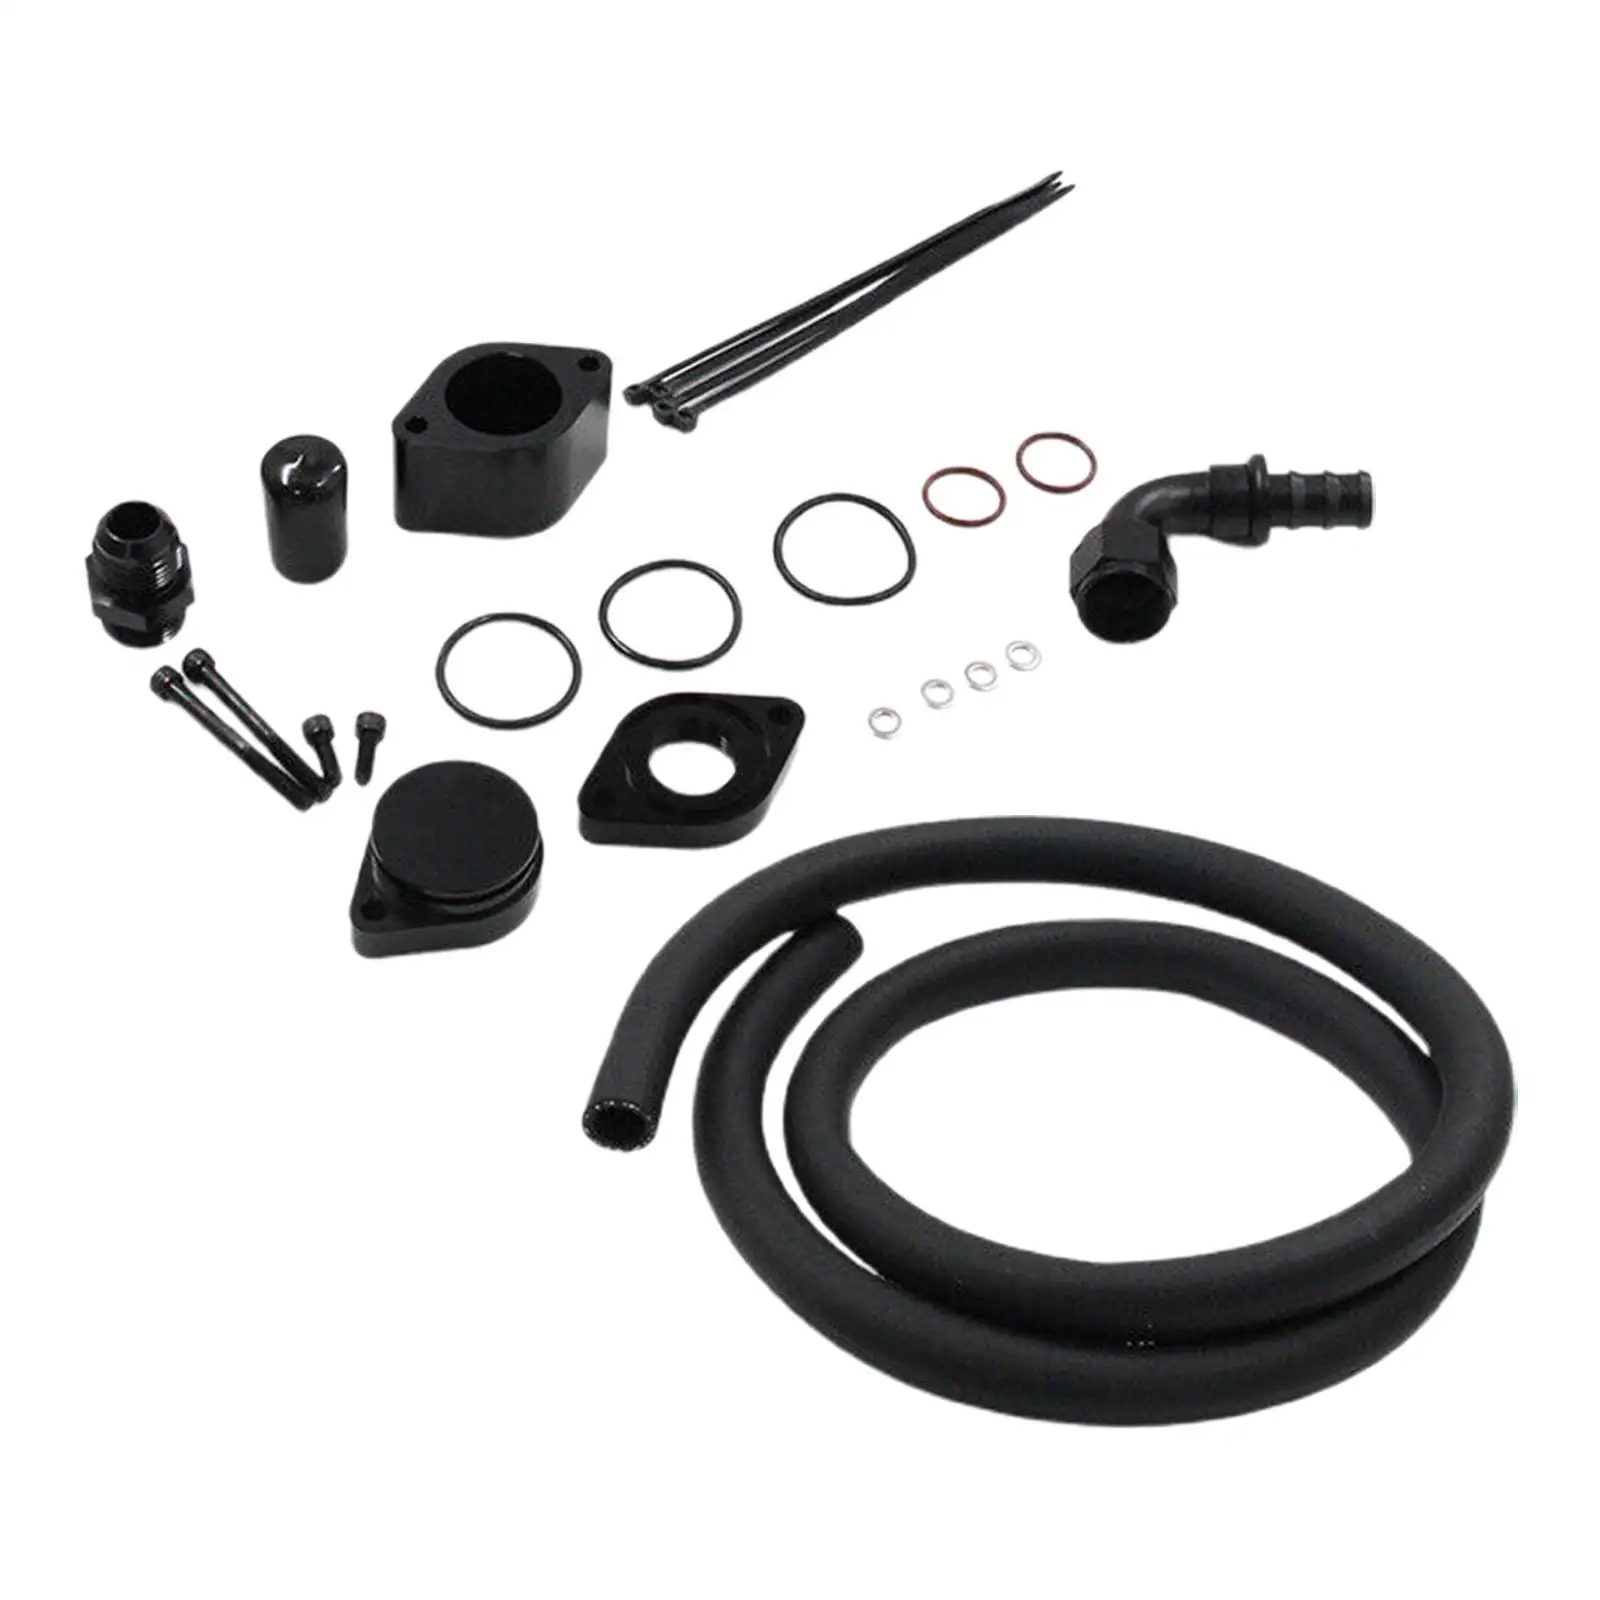 Pcv Reroute Engine Ventilation Kit Durable High Quality Replace Parts for 1120 6.7L Powerstroke Diesel  F350 F550 Accessories